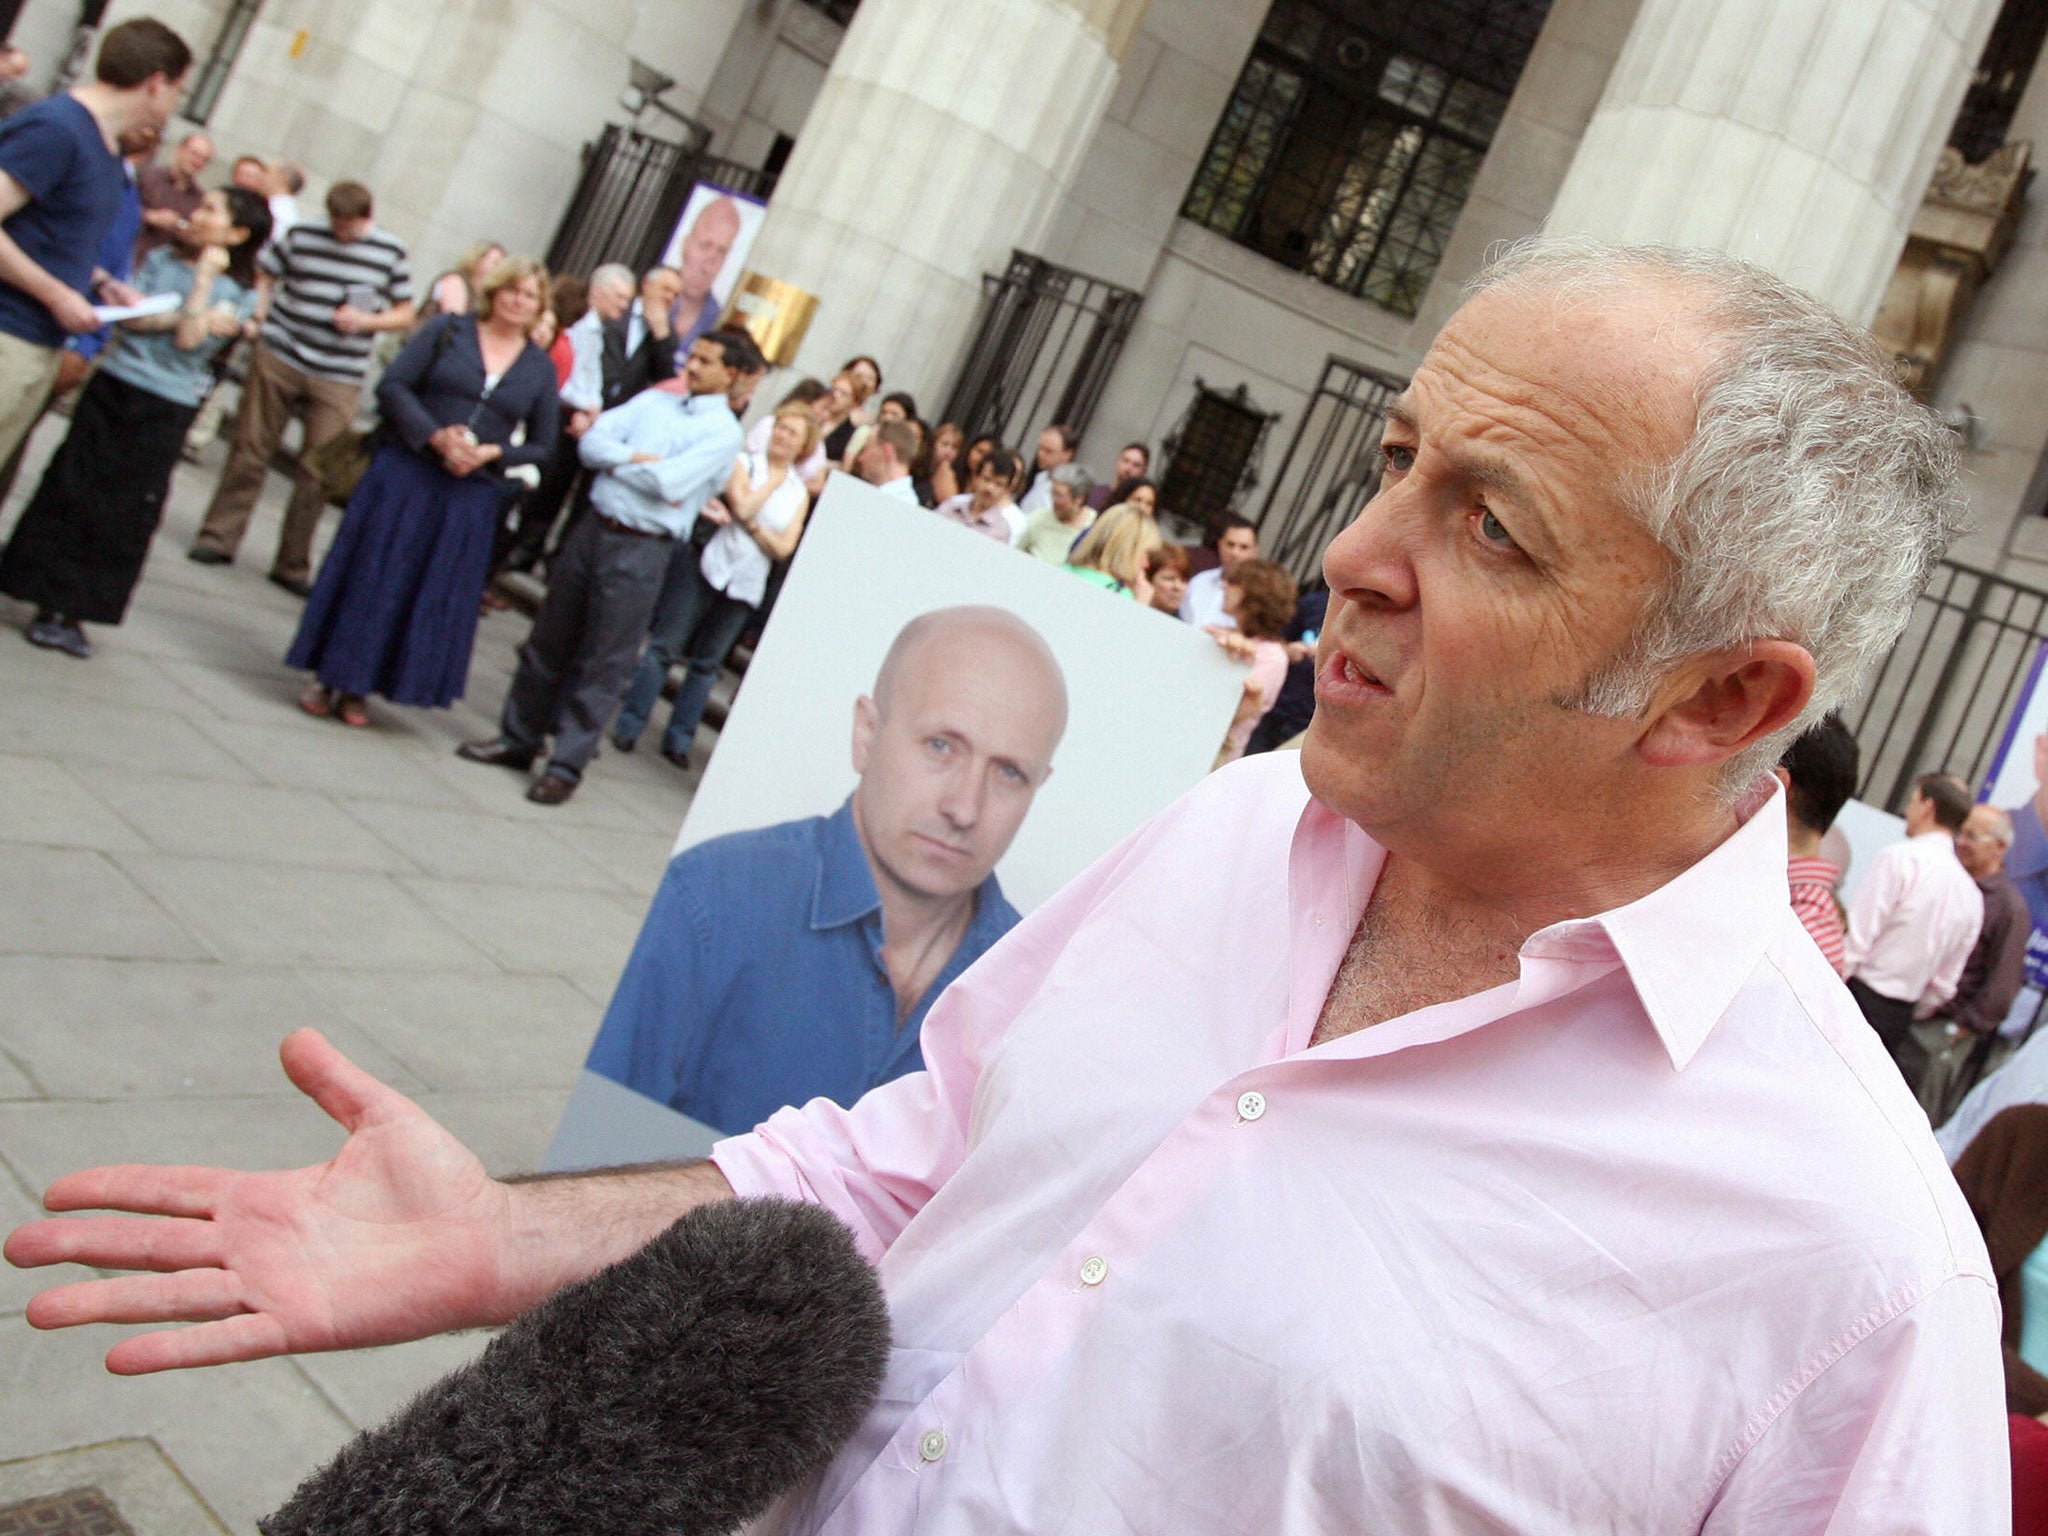 Jeremy Bowen joins other employees outside Bush House in central London, 16 April 2007, as they gather for a silent vigil in tribute to their kidnapped colleague Alan Johnston